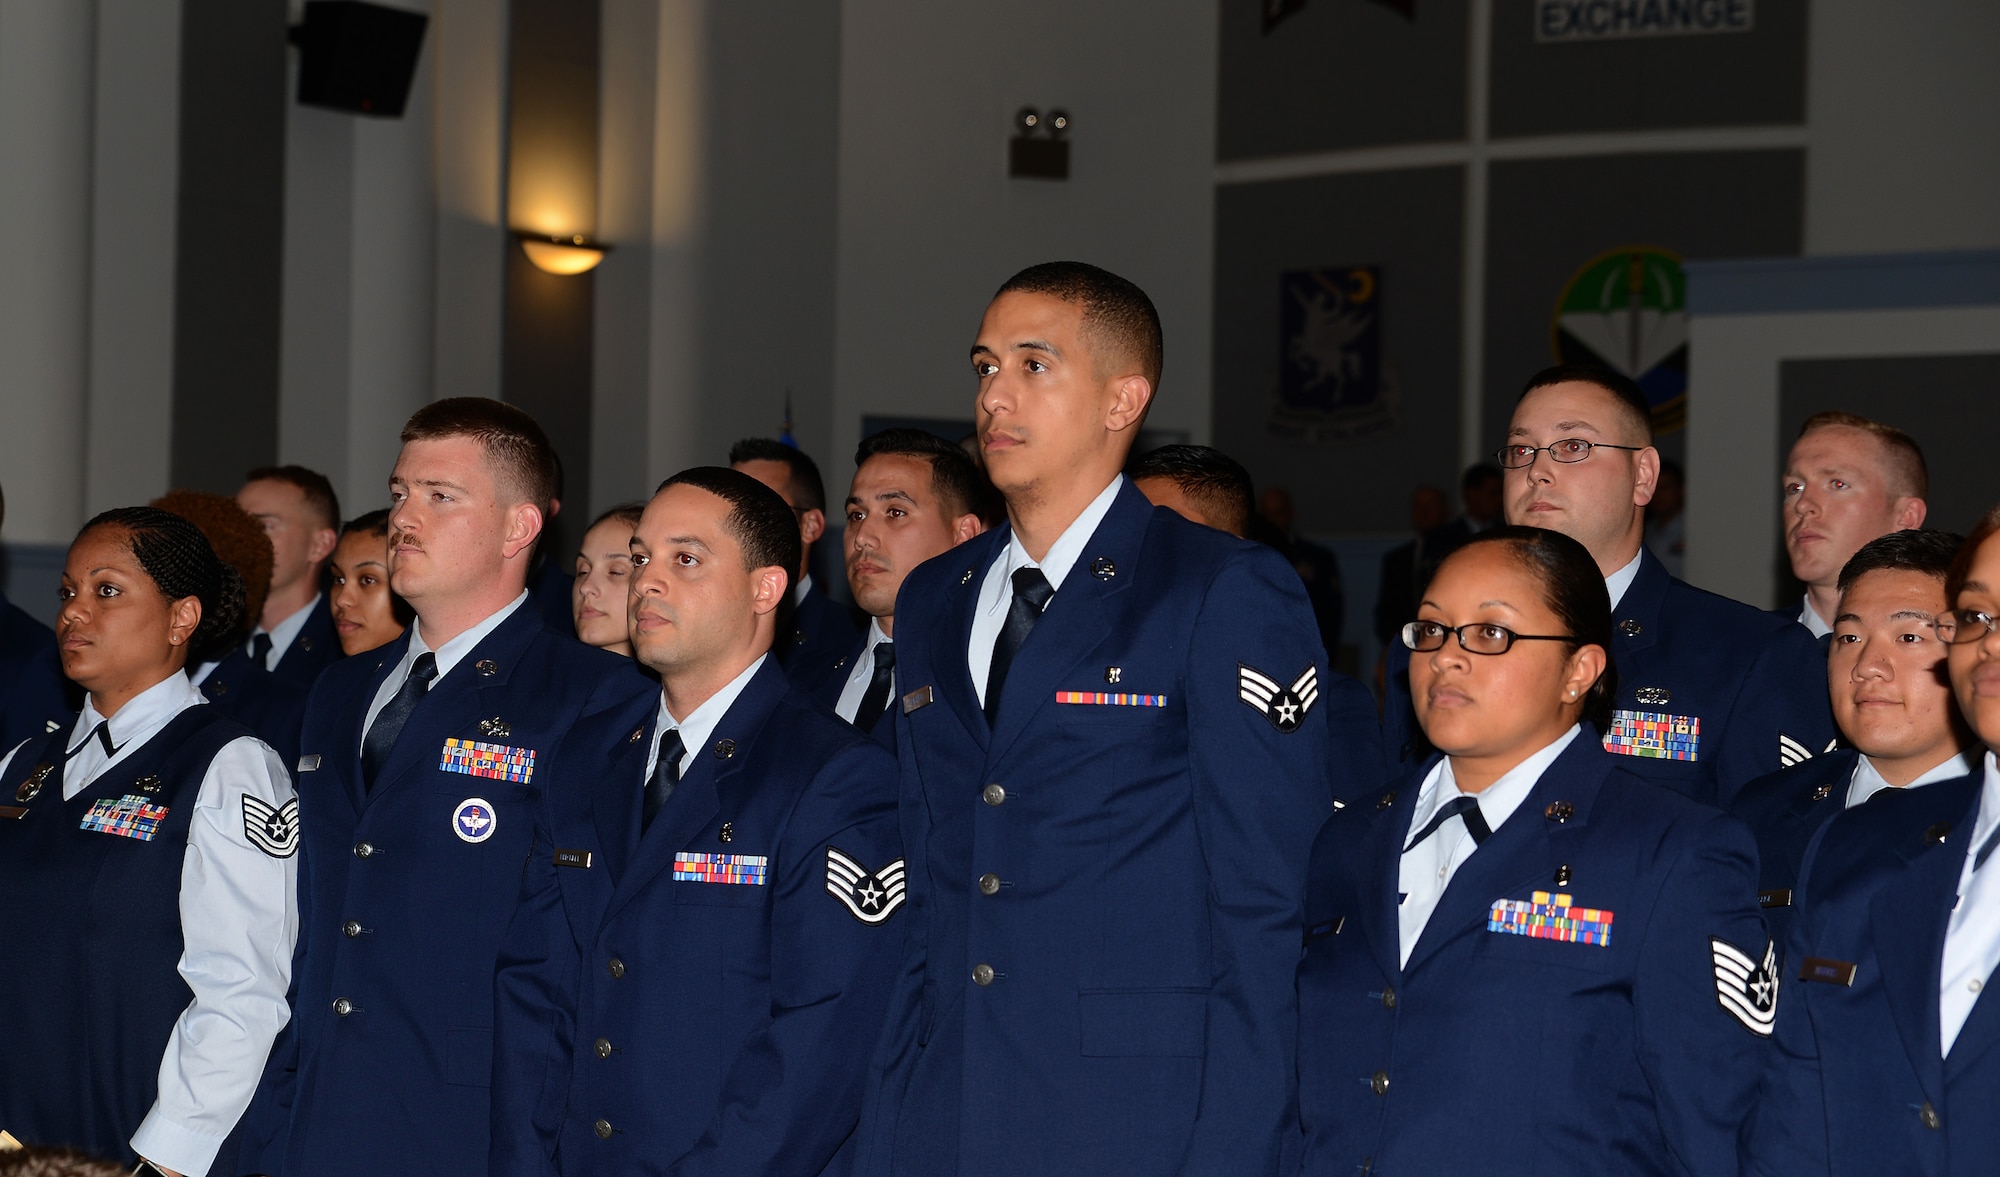 Community College of the Air Force graduates stand while being pronounced graduates at their graduation ceremony June 3, 2016 at Joint Base Lewis-McChord, Wash. More than 150 Team McChord Airmen earned CCAF Associate of Arts degrees. (U.S. Air Force photo/Senior Airman Jacob Jimenez)